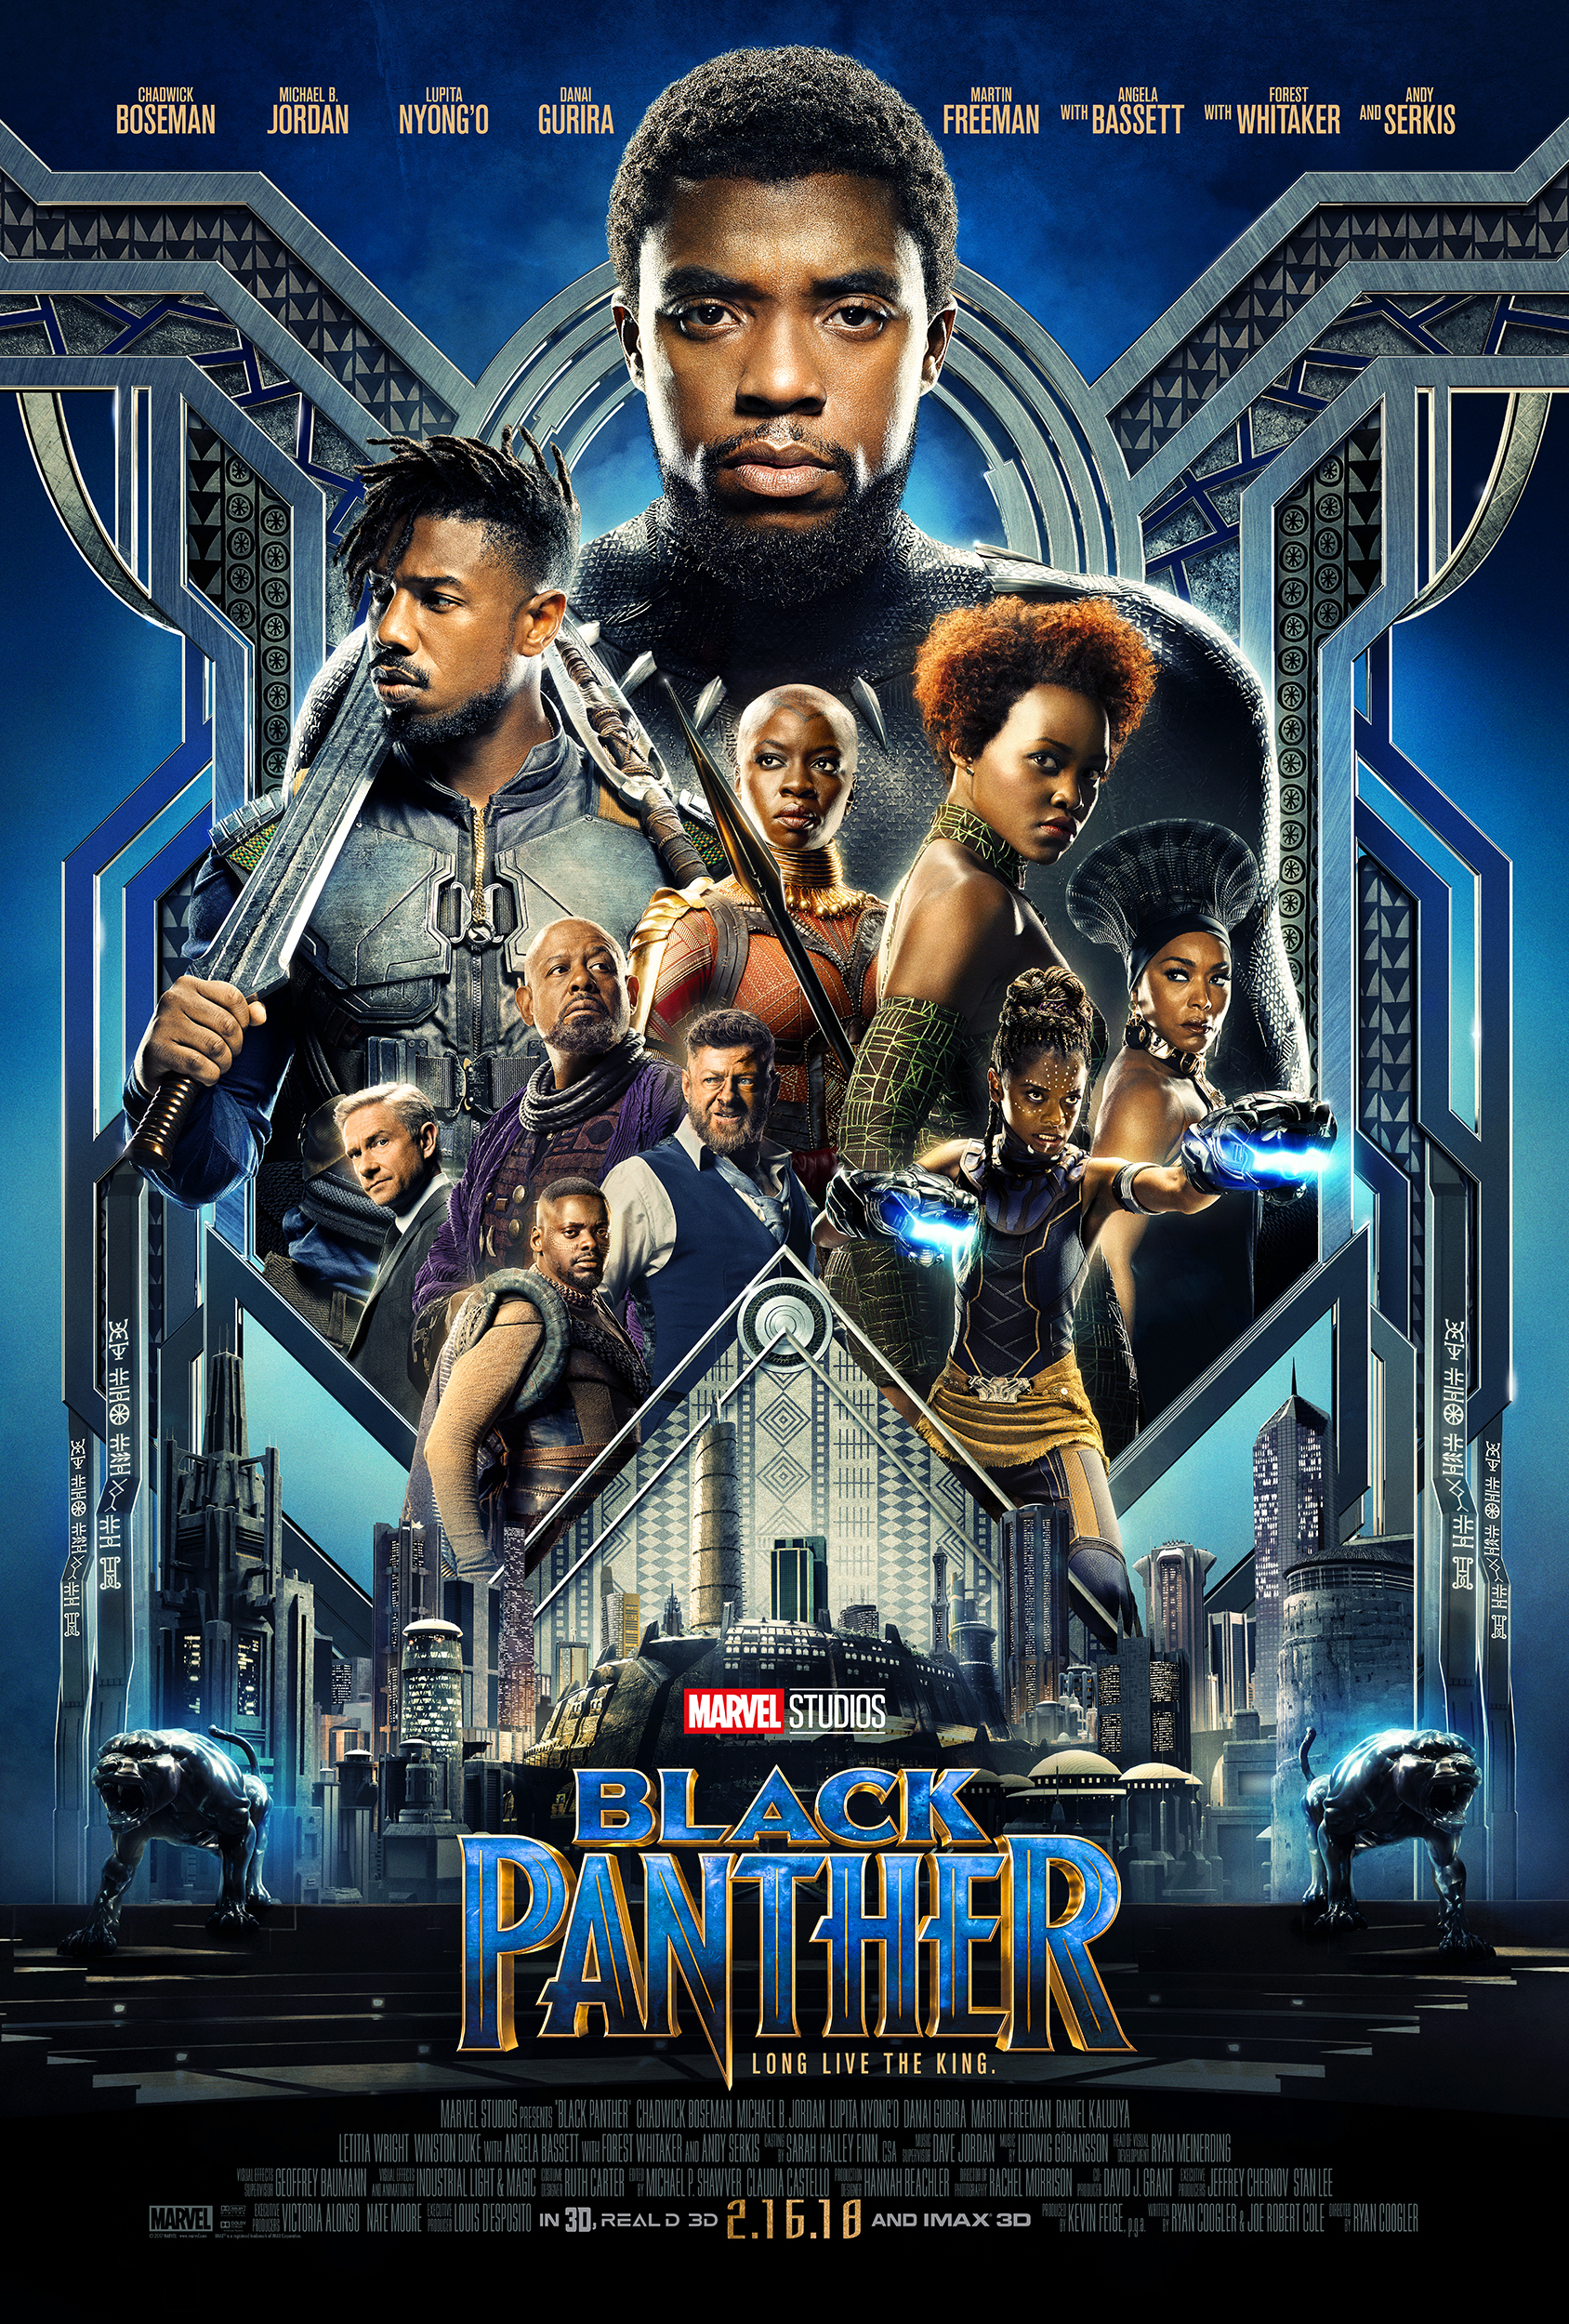 With the release of Black Panther almost upon us, it’s time to re-visit the world of Wakanda.